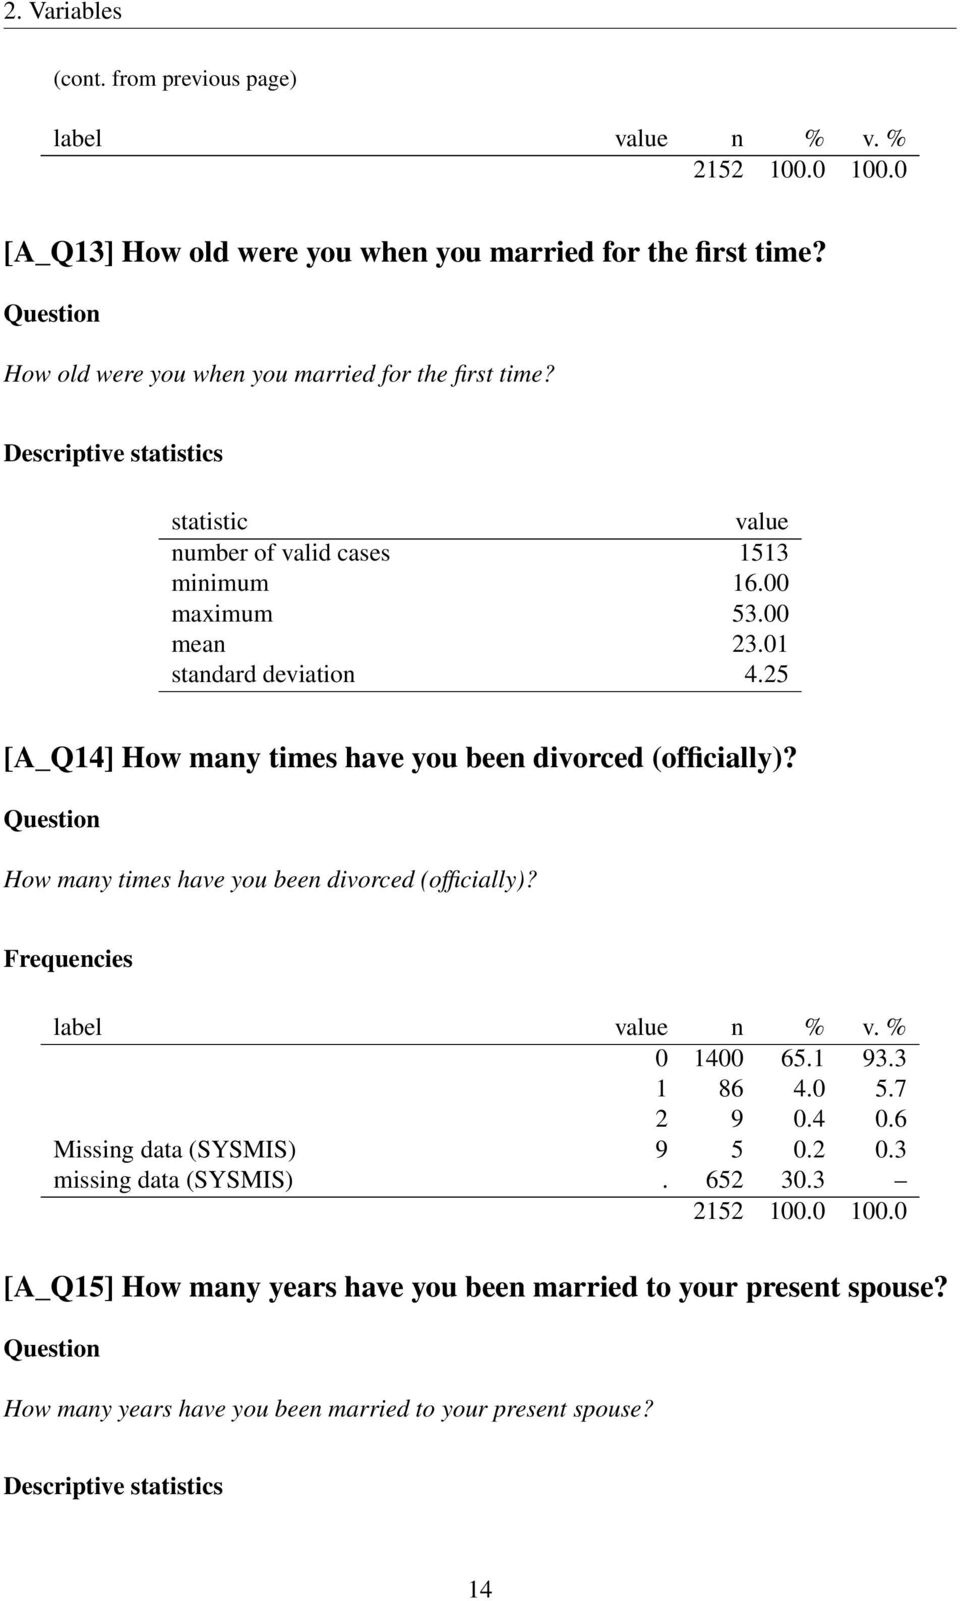 01 standard deviation 4.25 [A_Q14] How many times have you been divorced (officially)? How many times have you been divorced (officially)? 0 1400 65.1 93.3 1 86 4.